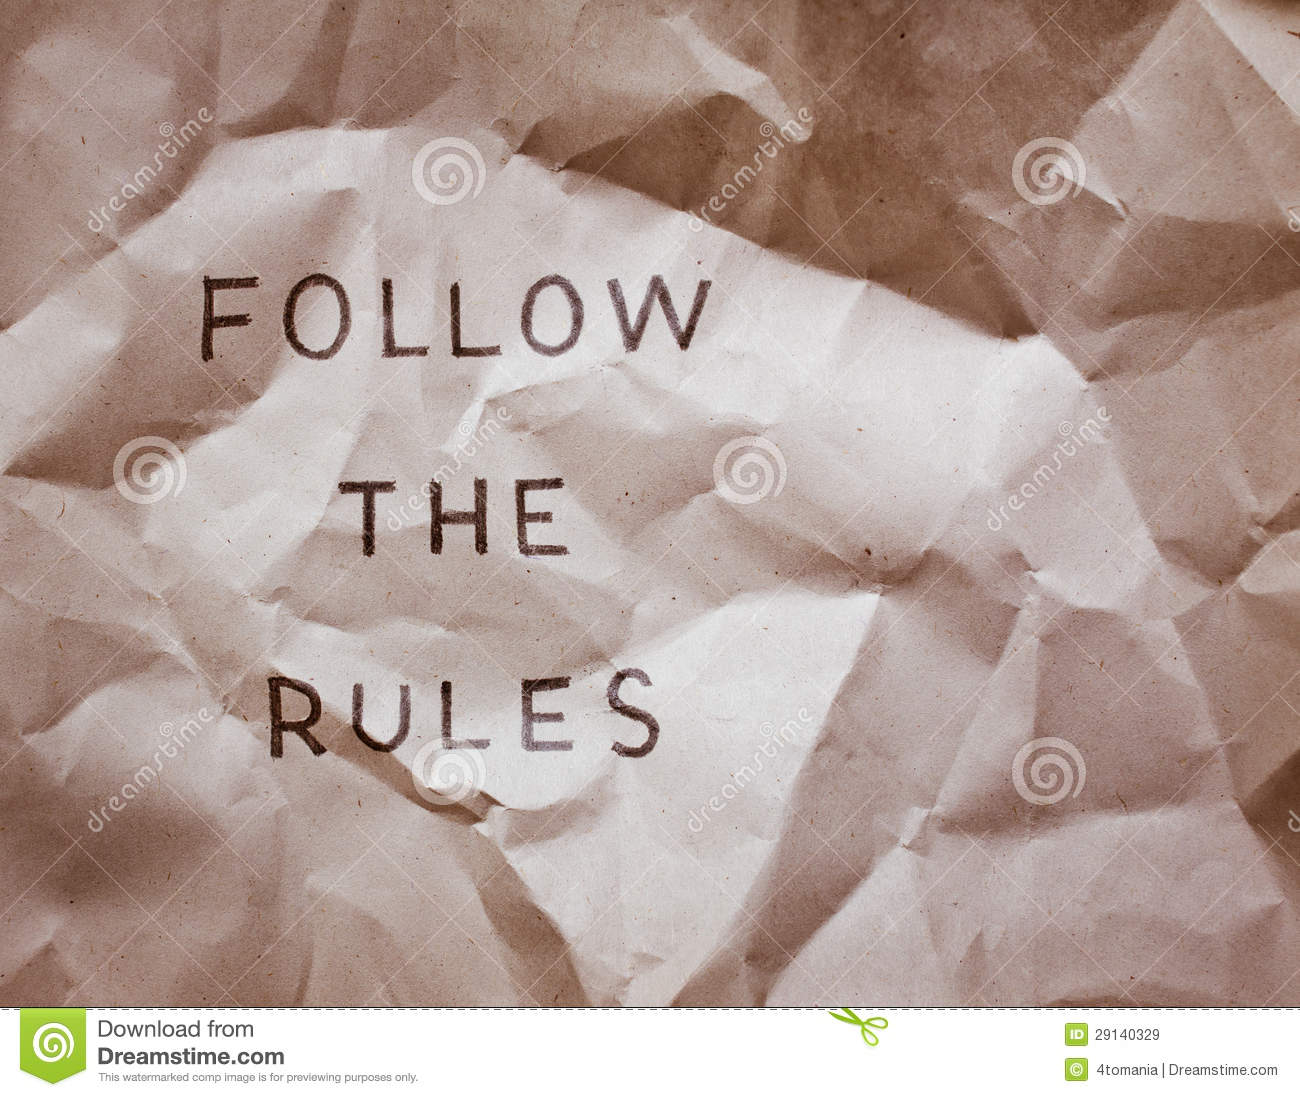 Follow The Rules Words On A Grunge Crumpled Paper Concept For